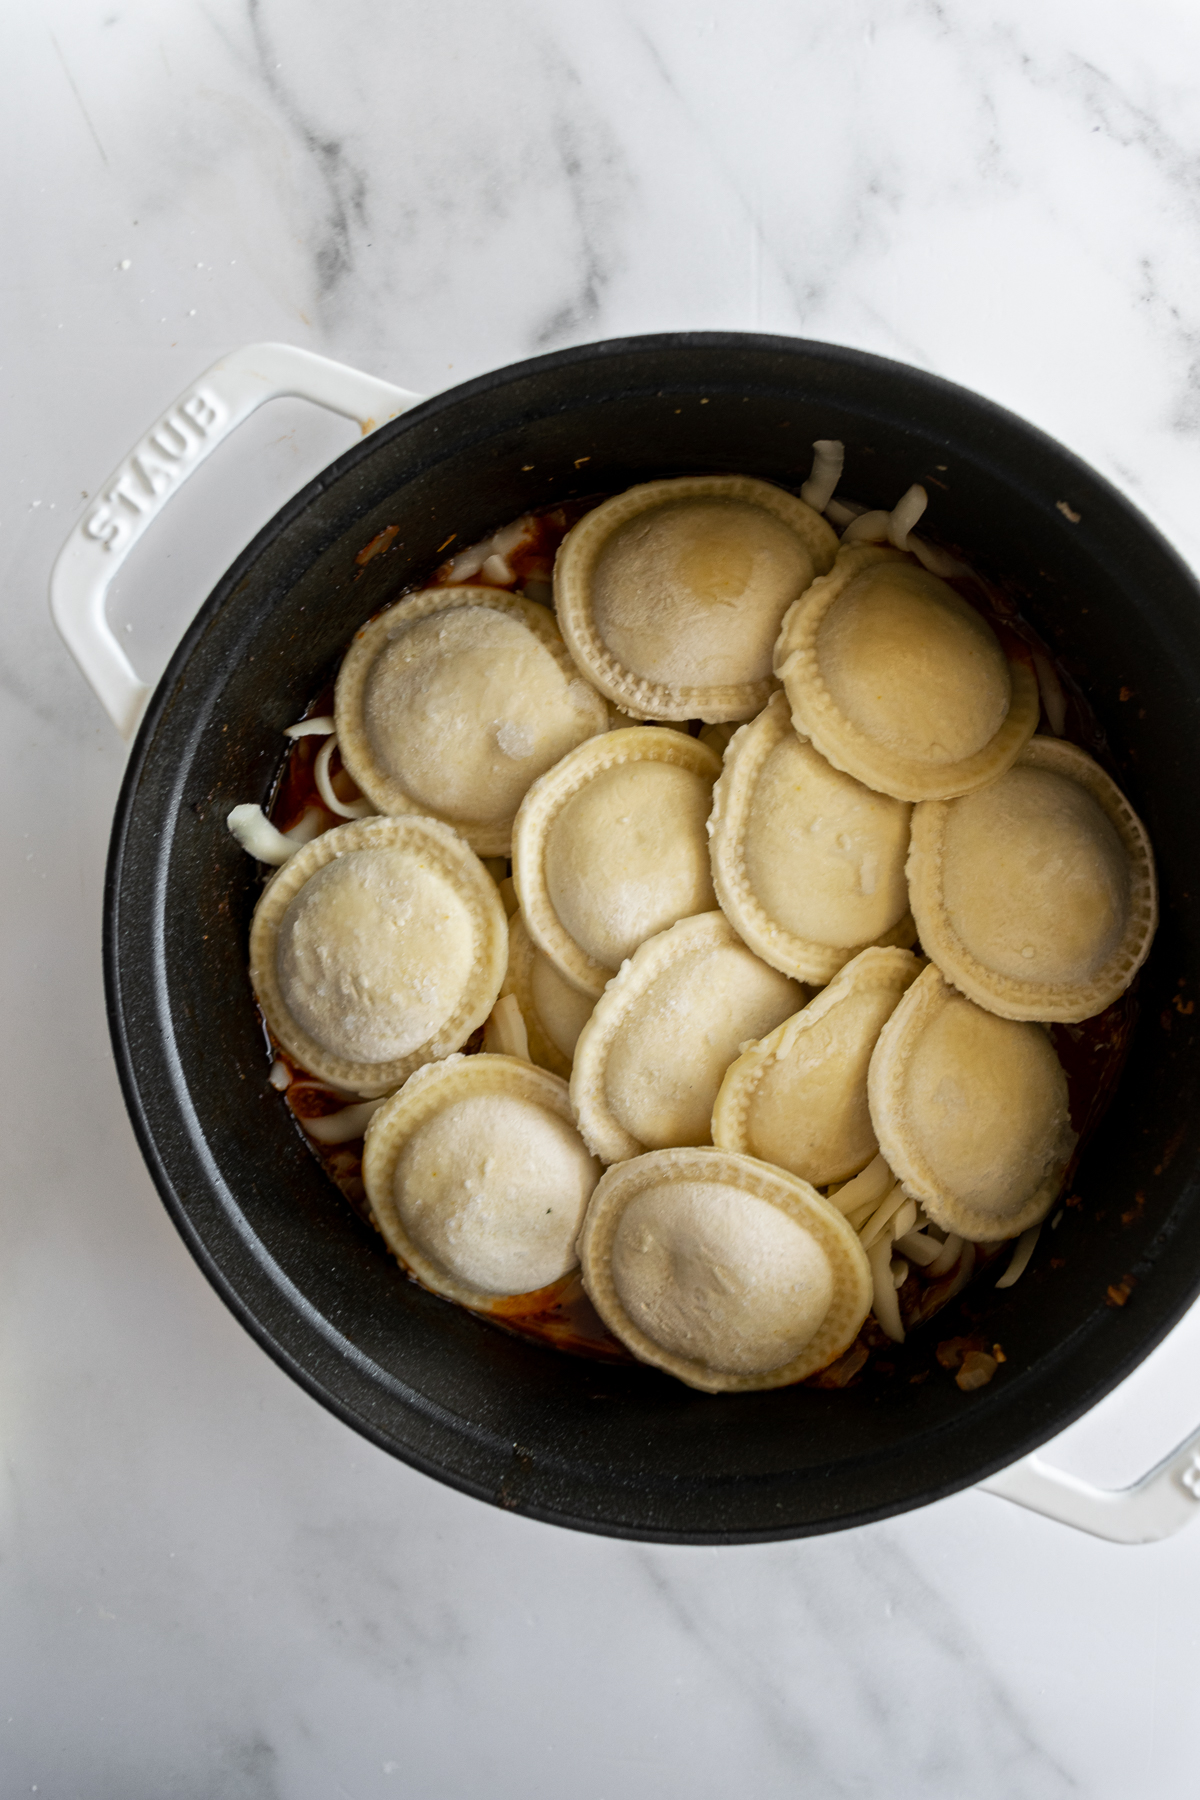 a single layer of uncooked ravioli in a black pot.